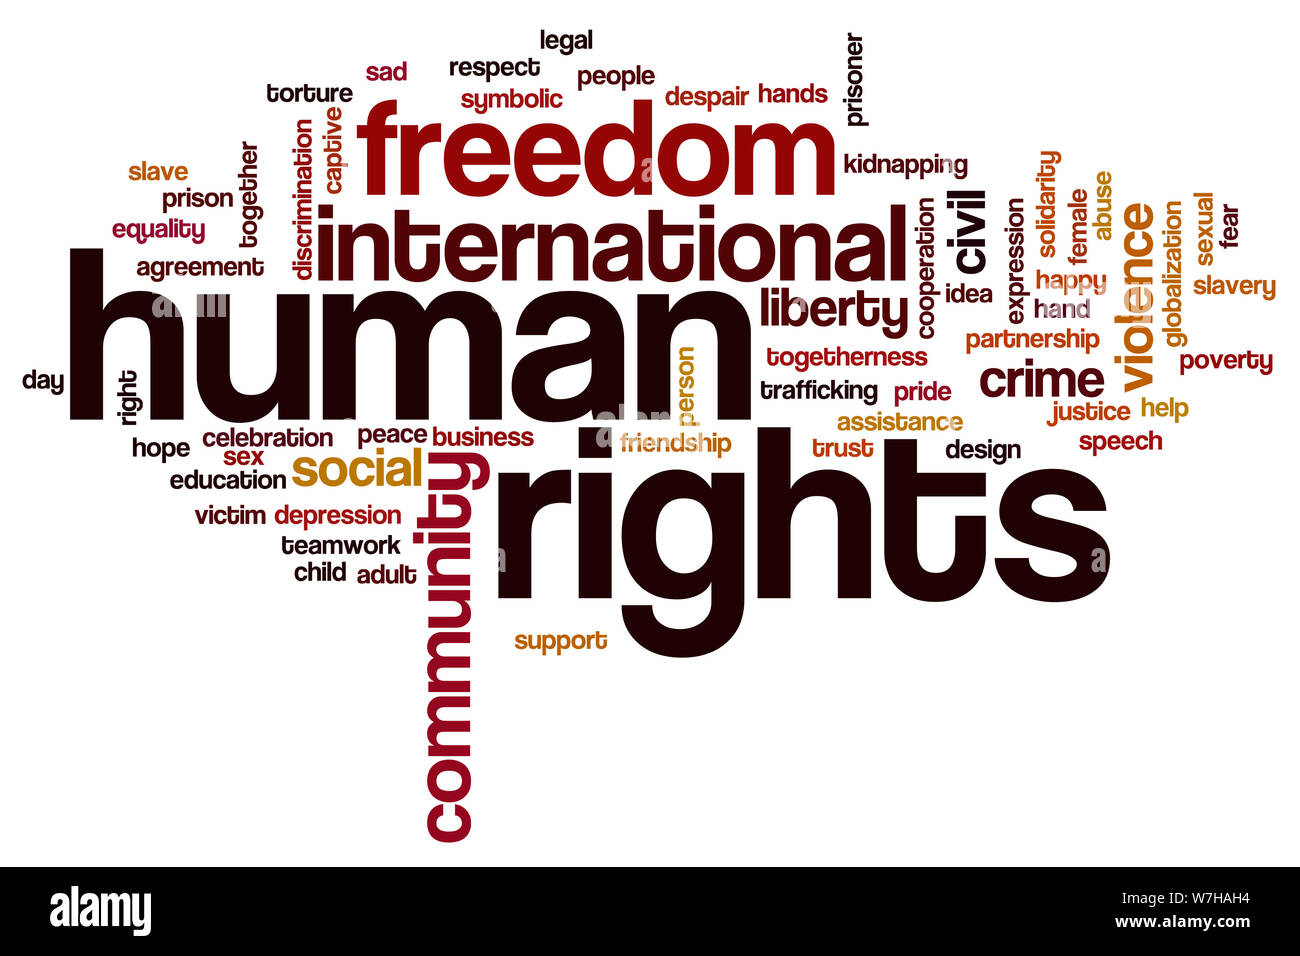 Human rights word cloud concept Stock Photo